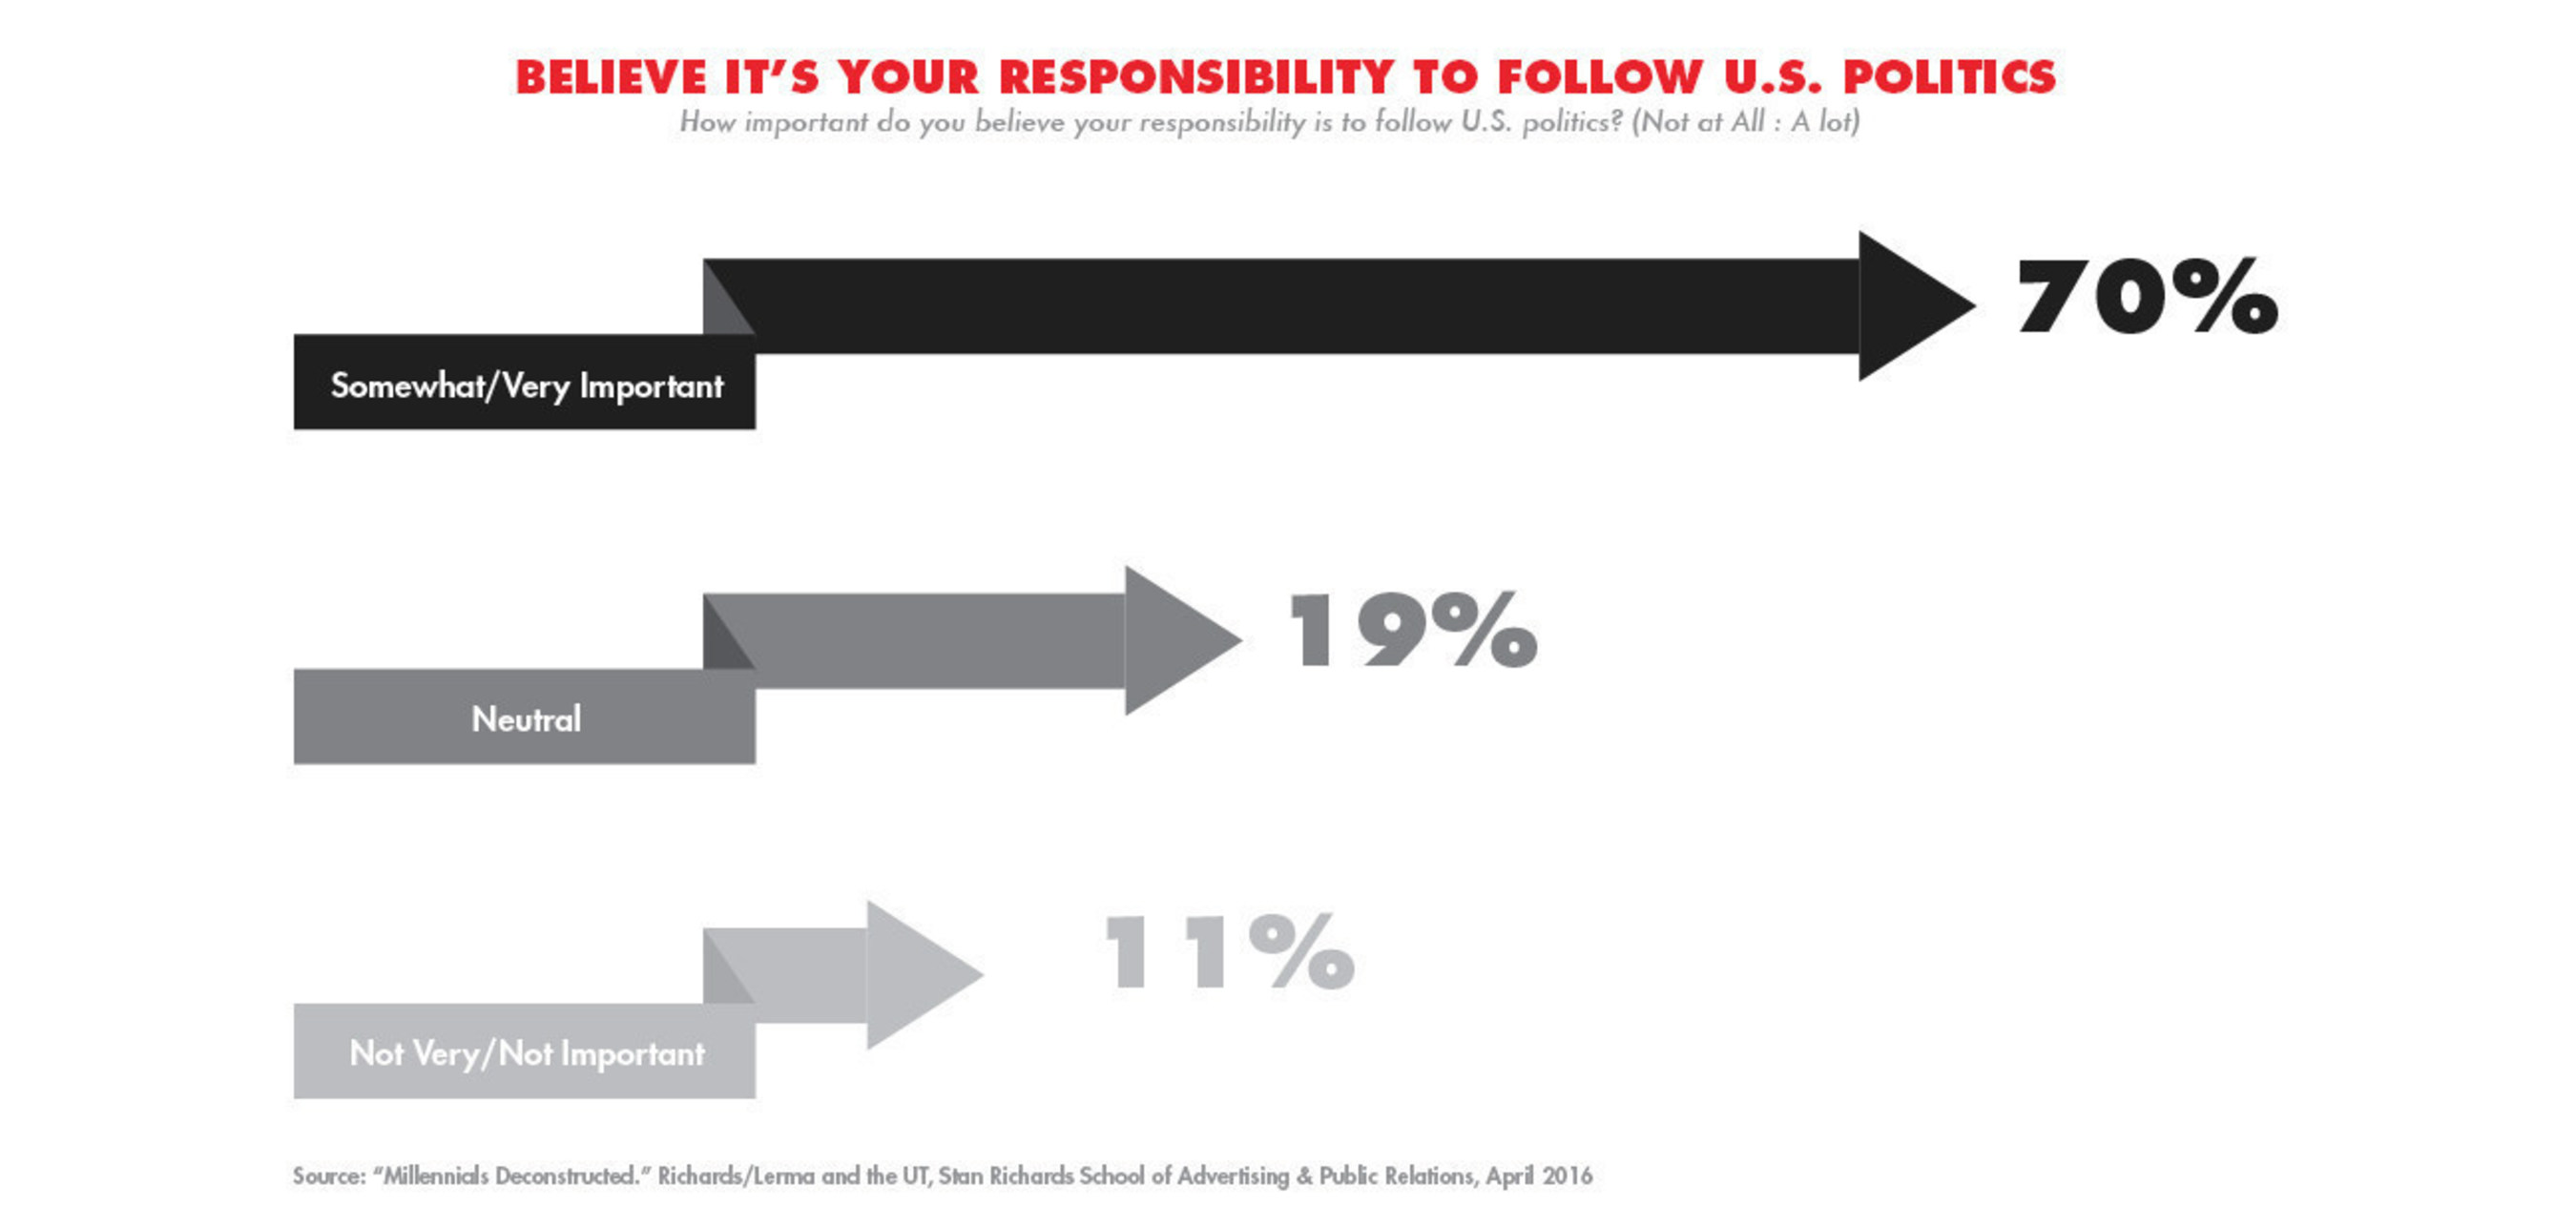 How important do you believe your responsibility is to follow U.S. politics?